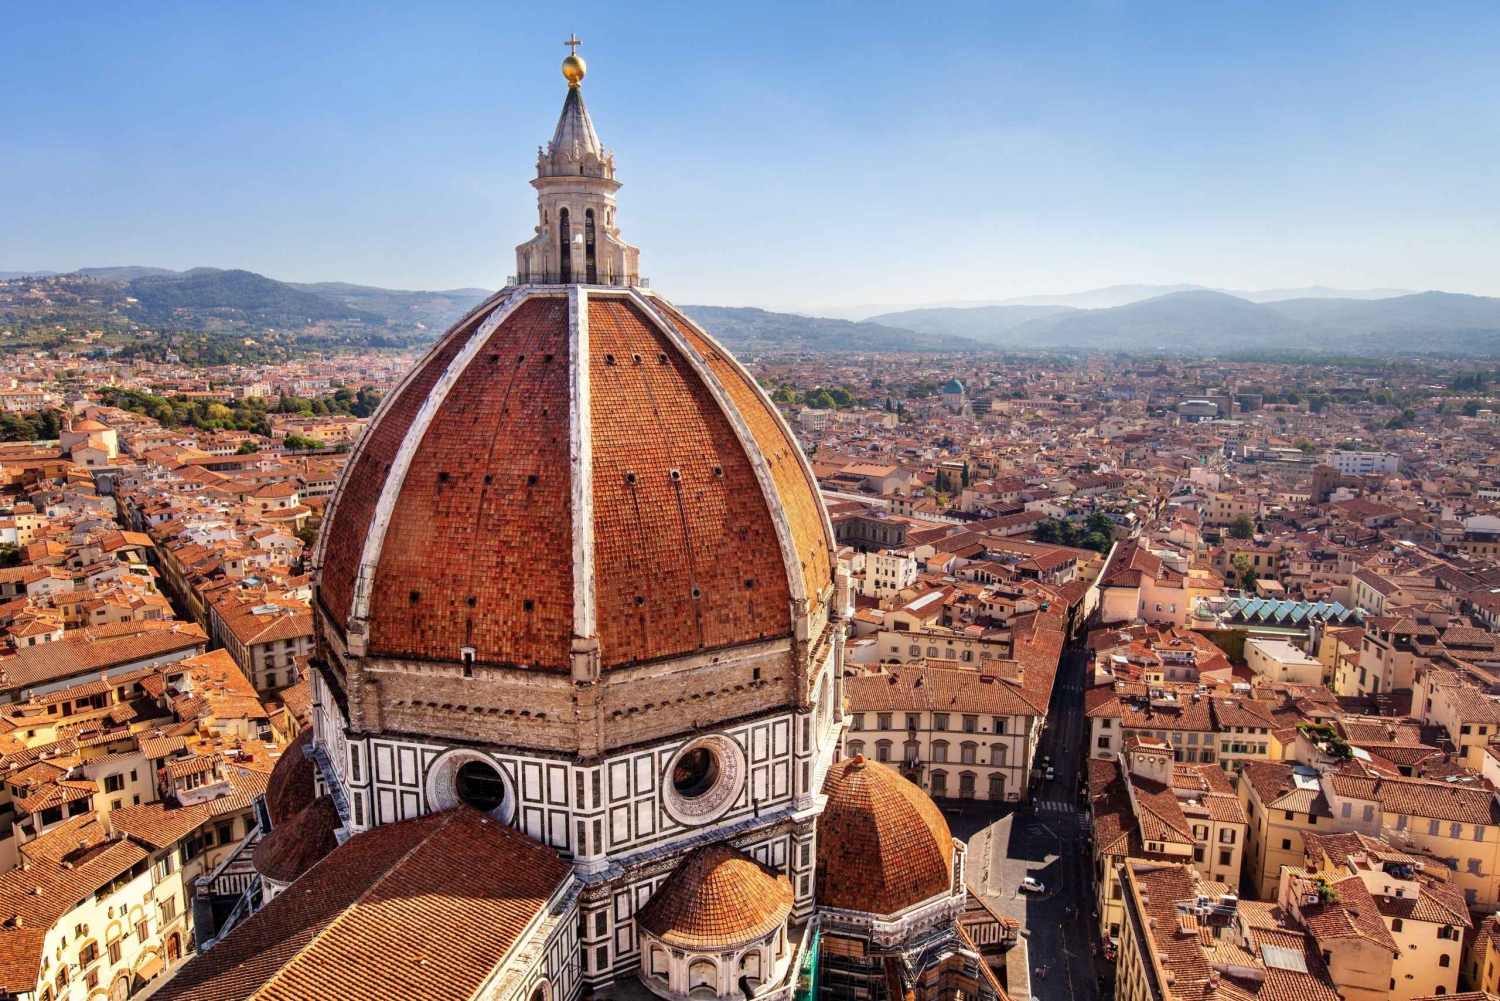 Just ticket to the Brunelleschi 's Dome with Escort